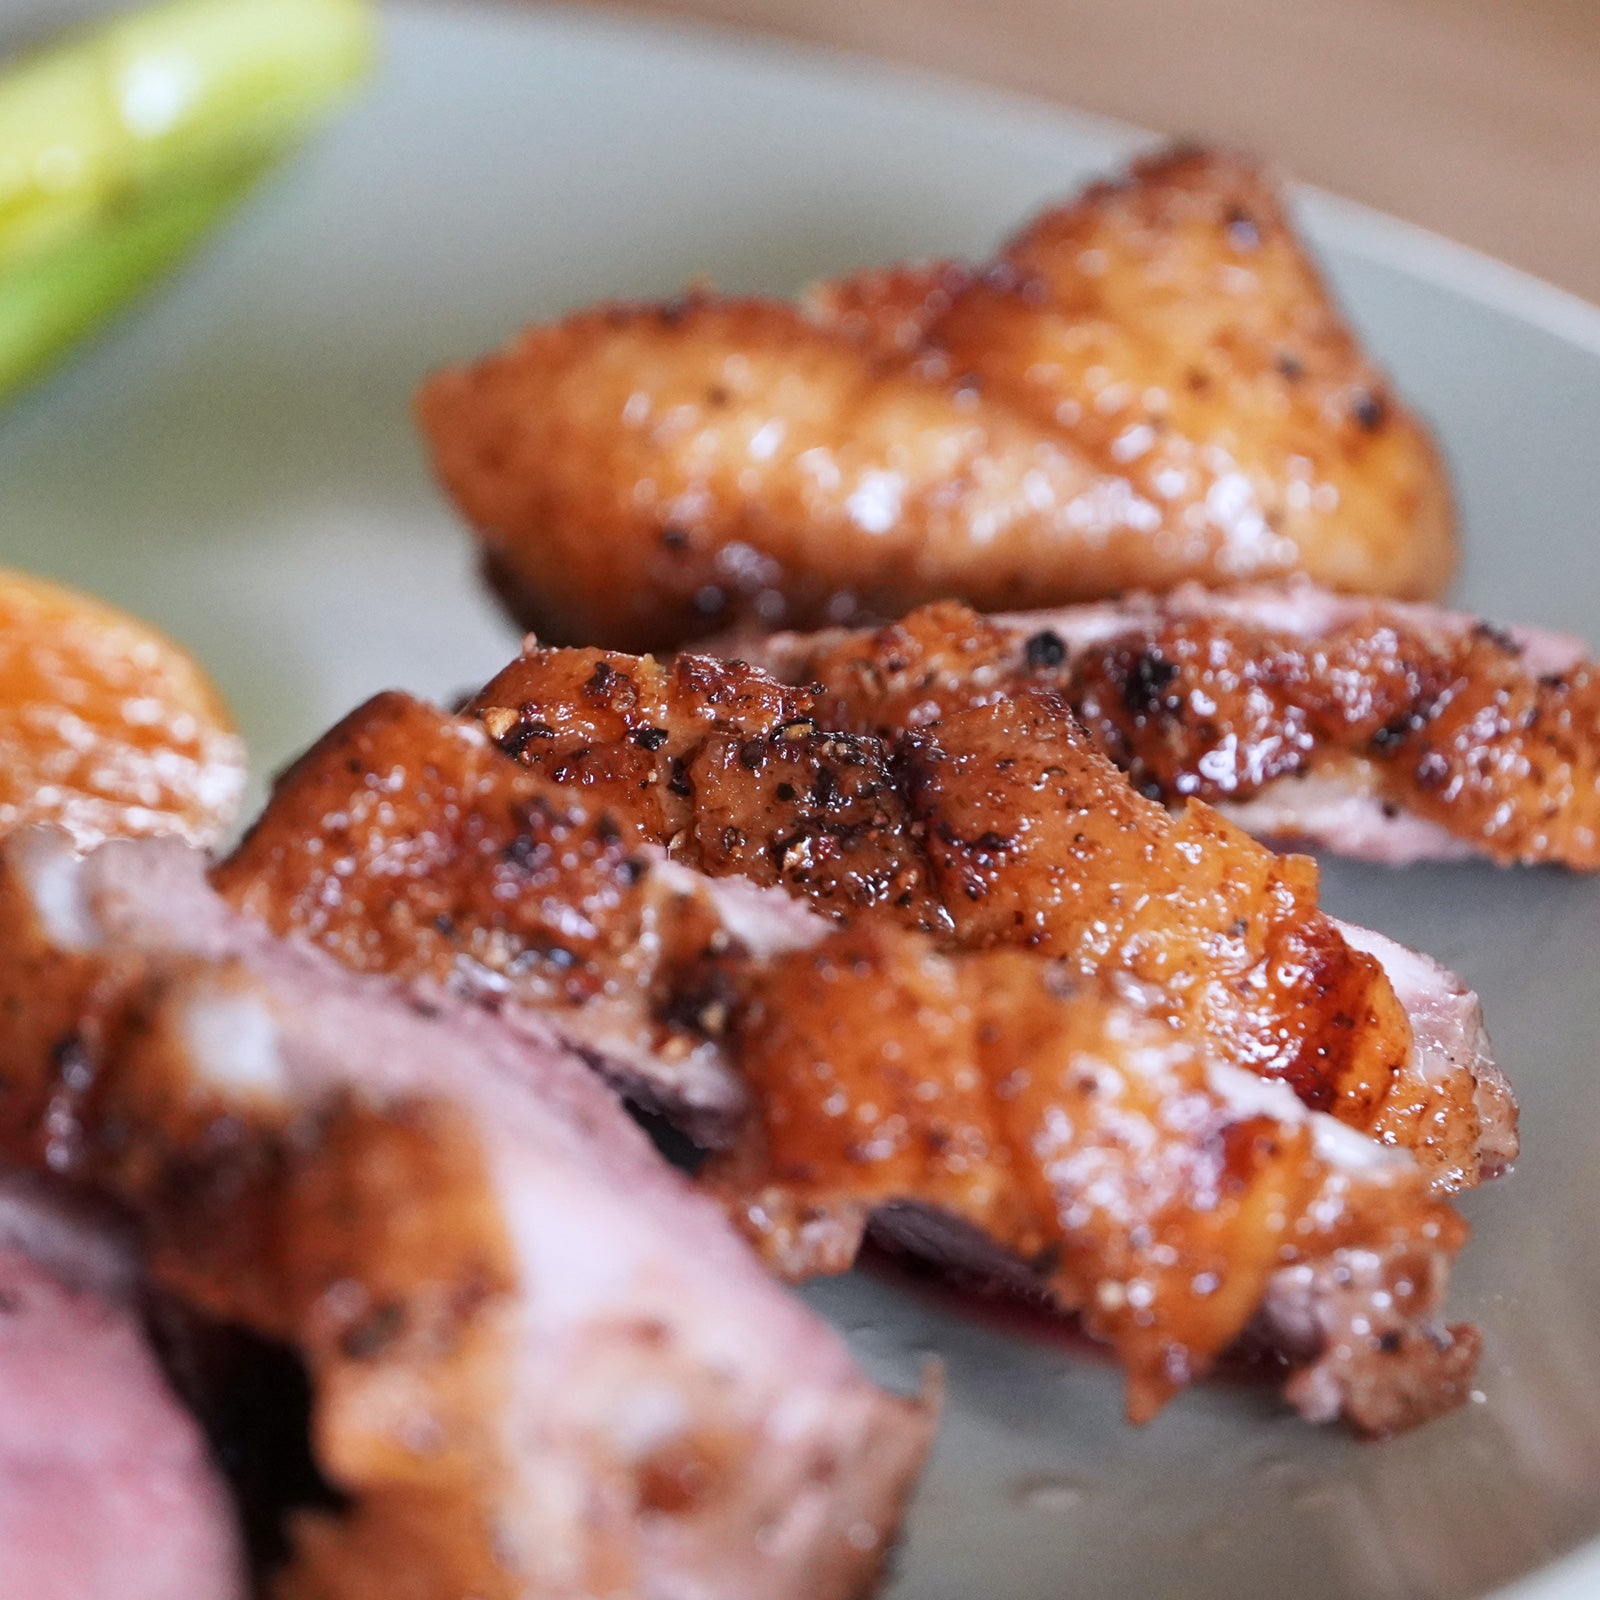 Range-Free Skin-on Duck Breasts from New Zealand (400g) - Horizon Farms